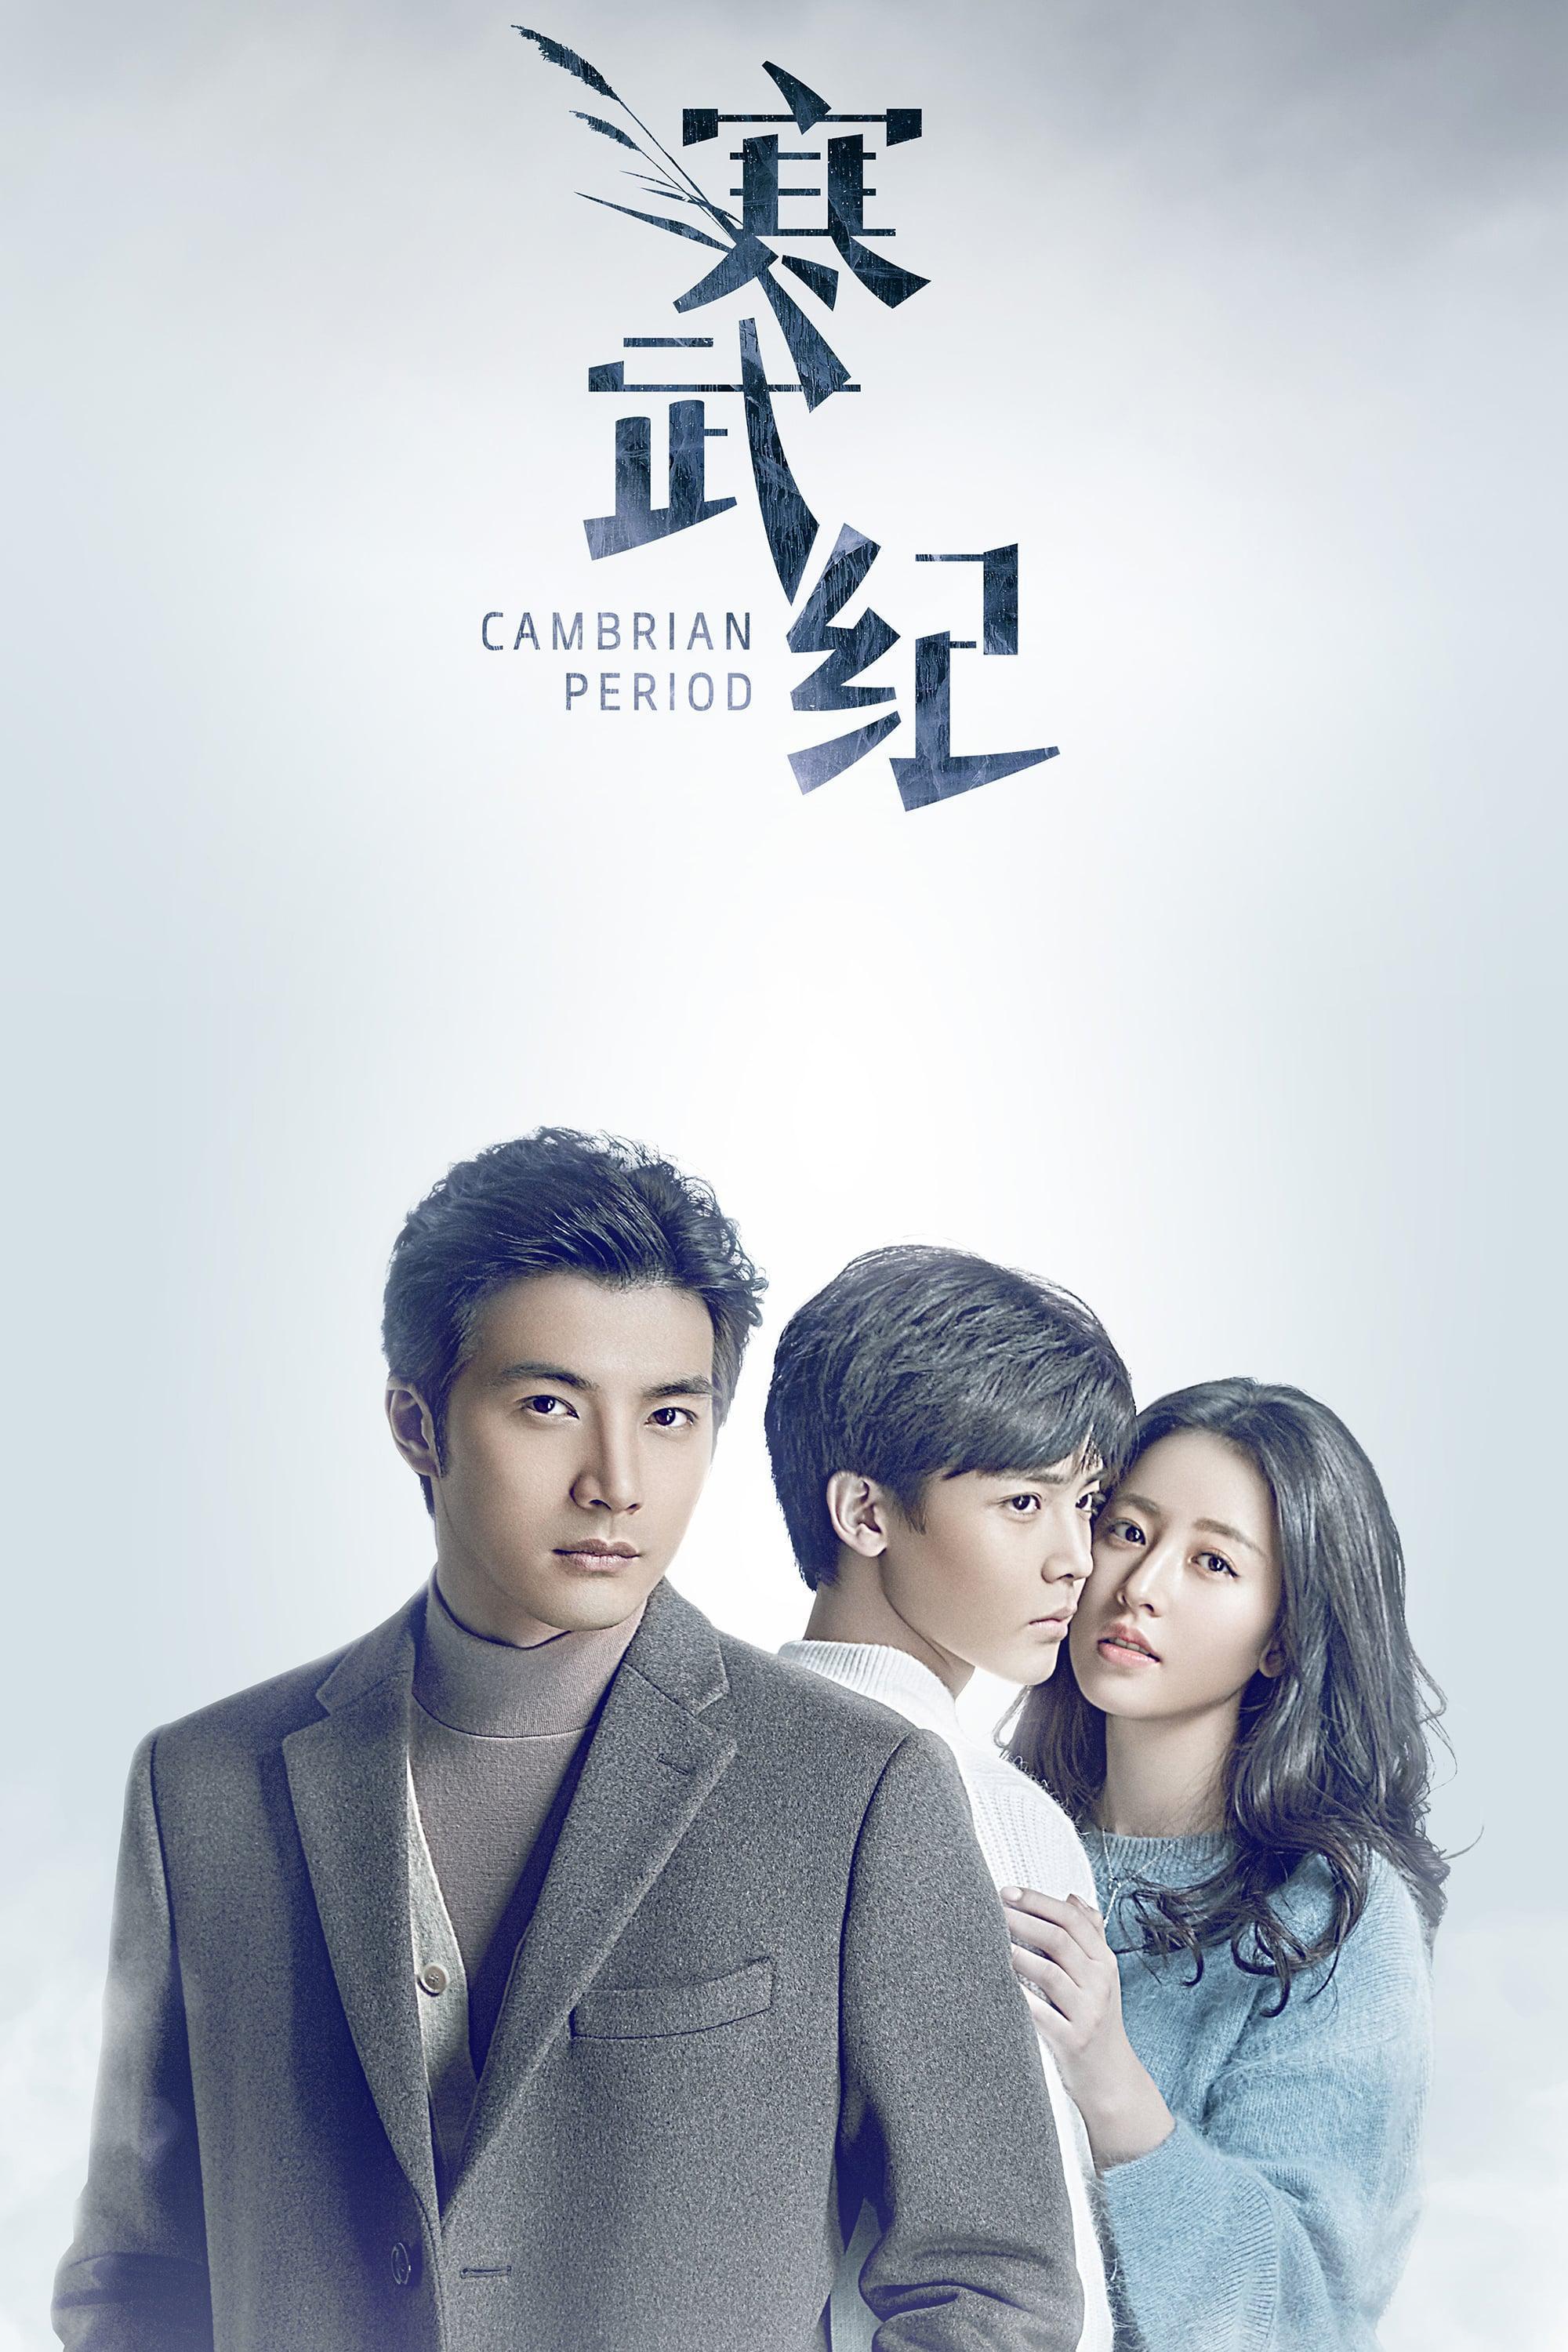 TV ratings for Cambrian Period (寒武纪) in Portugal. Youku TV series